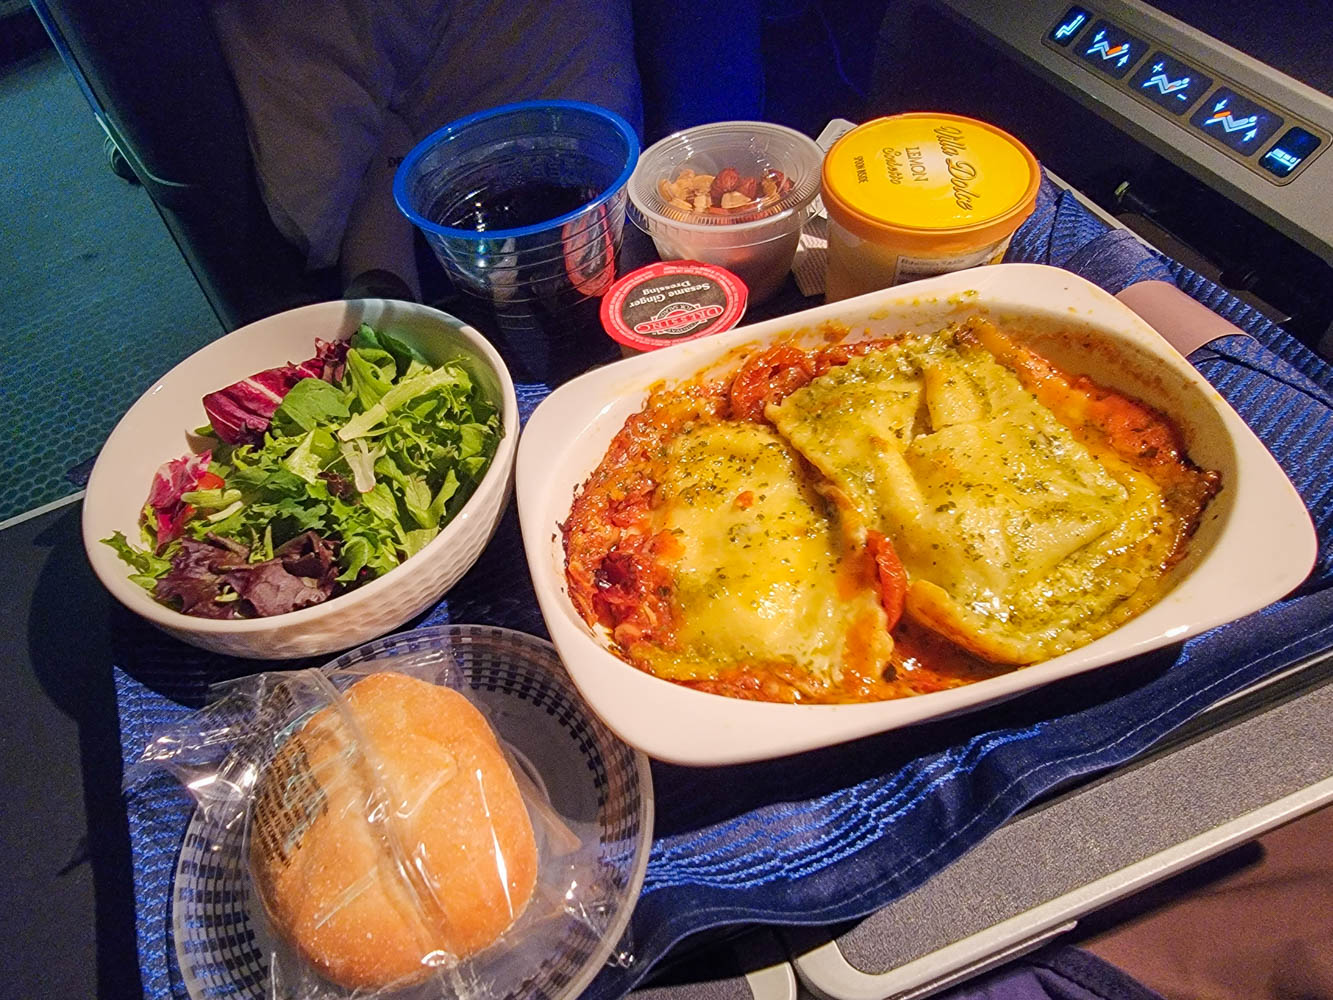 Polaris Business Class Meal United